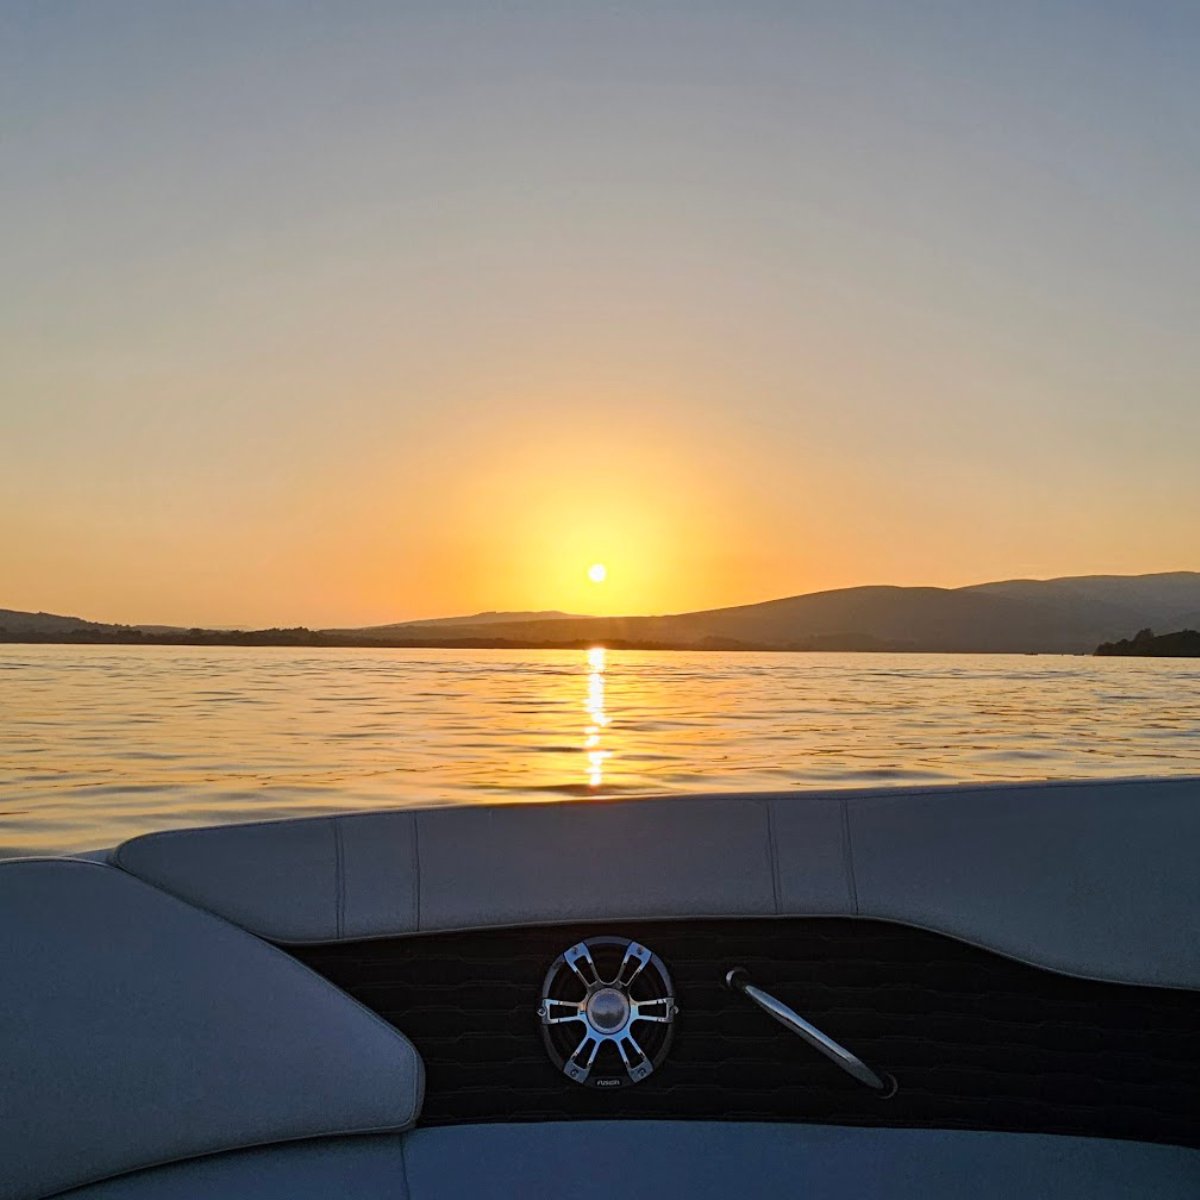 Ahoy there! ⚓️ New Month - New Members! We are delighted to welcome Freedom Boat Club, Loch Lomond to our Love Loch Lomond Community 💙 Visit their listing on our website - lovelochlomond.com/listing/freedo…